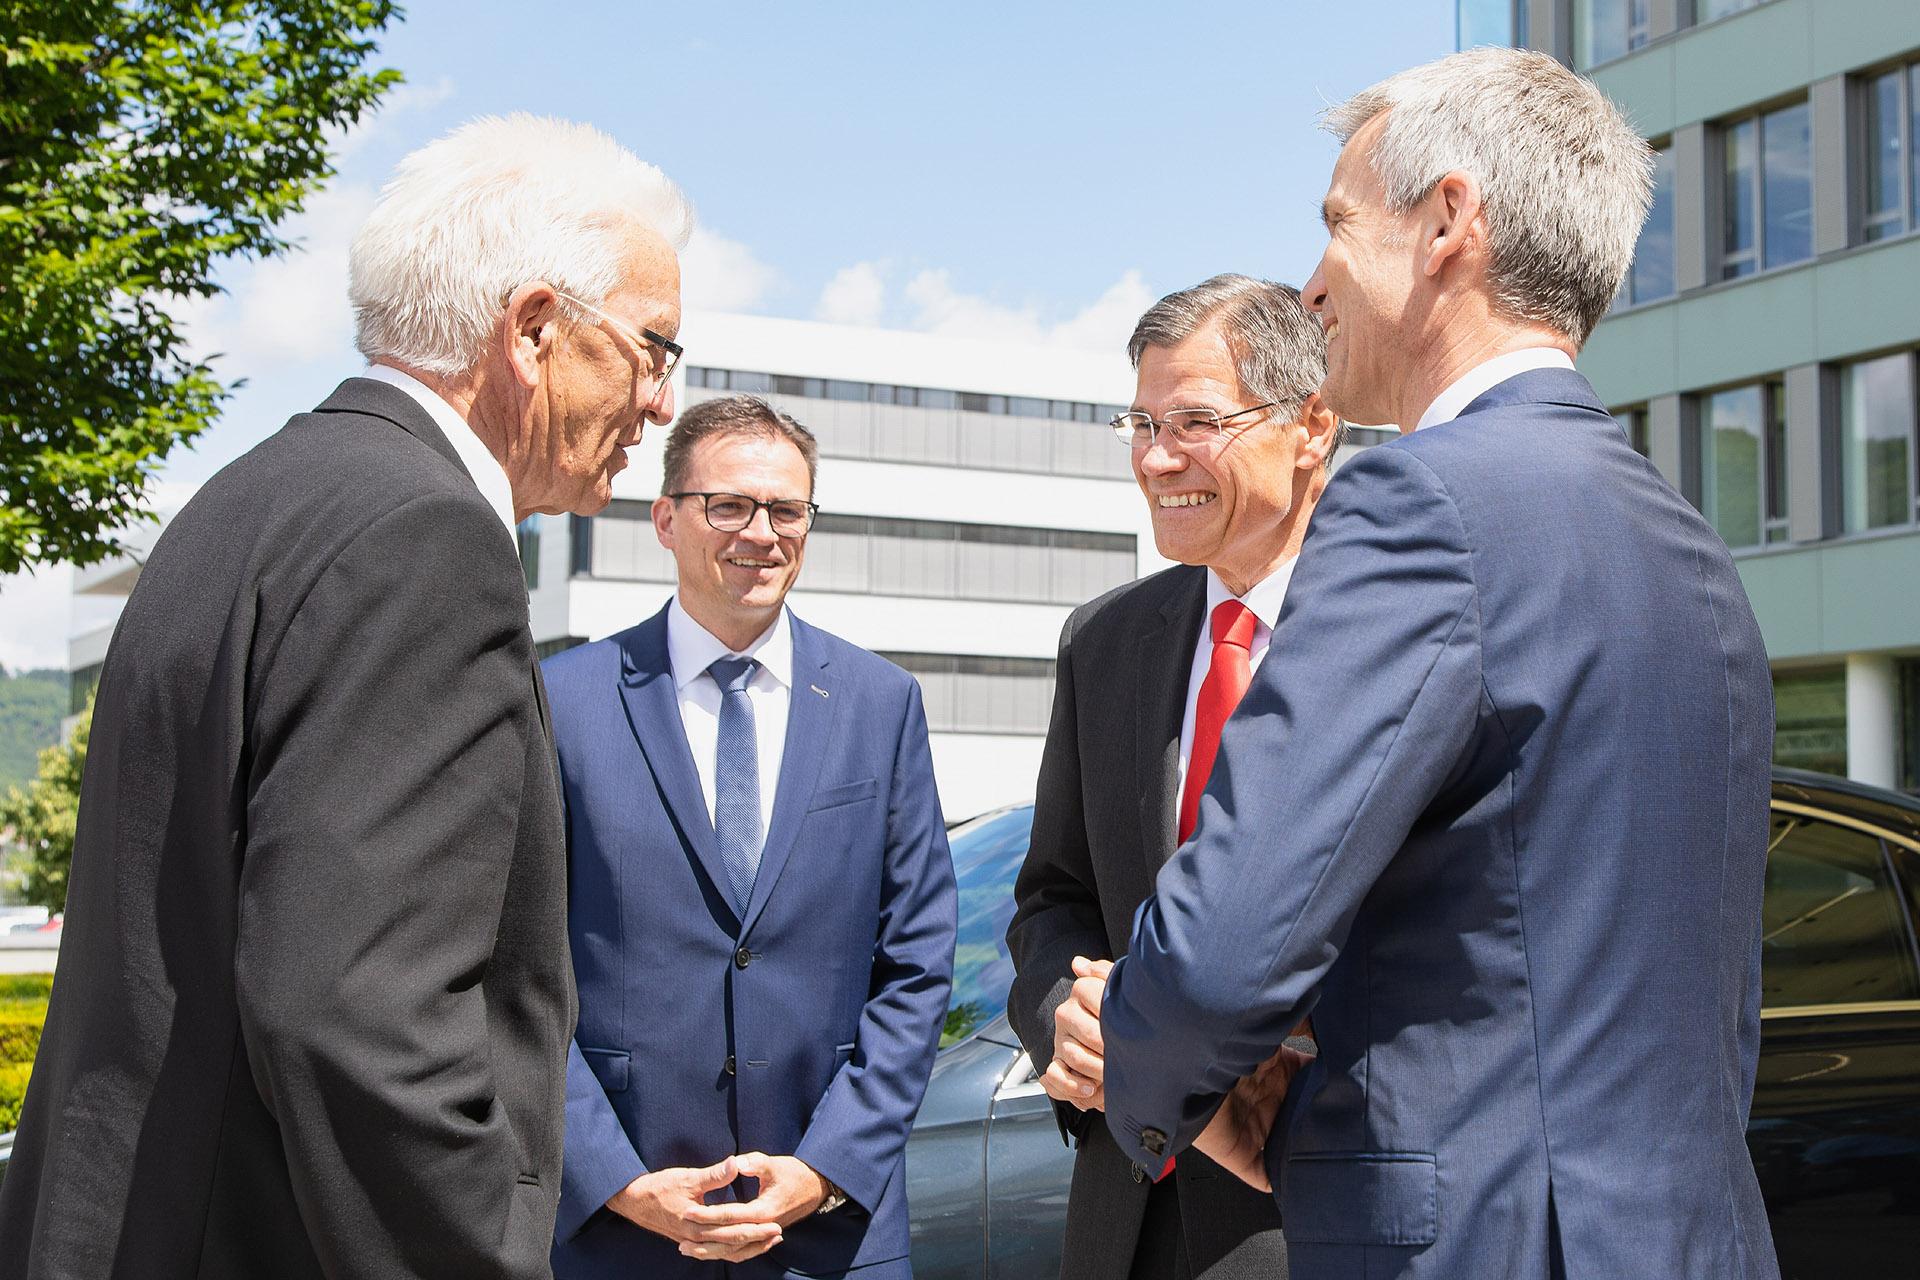 Today, the Governor of the state of Baden-Württemberg, Winfried Kretschmann, visited the Oberkochen headquarters of ZEISS, an internationally leading technology enterprise operating in the fields of optics and optoelectronics. Dr. Karl Lamprecht, President and CEO of ZEISS and Andreas Pecher, Member of the ZEISS Executive Board with responsibility for the Semiconductor Manufacturing Technology (SMT) segment, gave the Minister President a glimpse into the production of the &quot;most precise&quot; mirrors in the world.